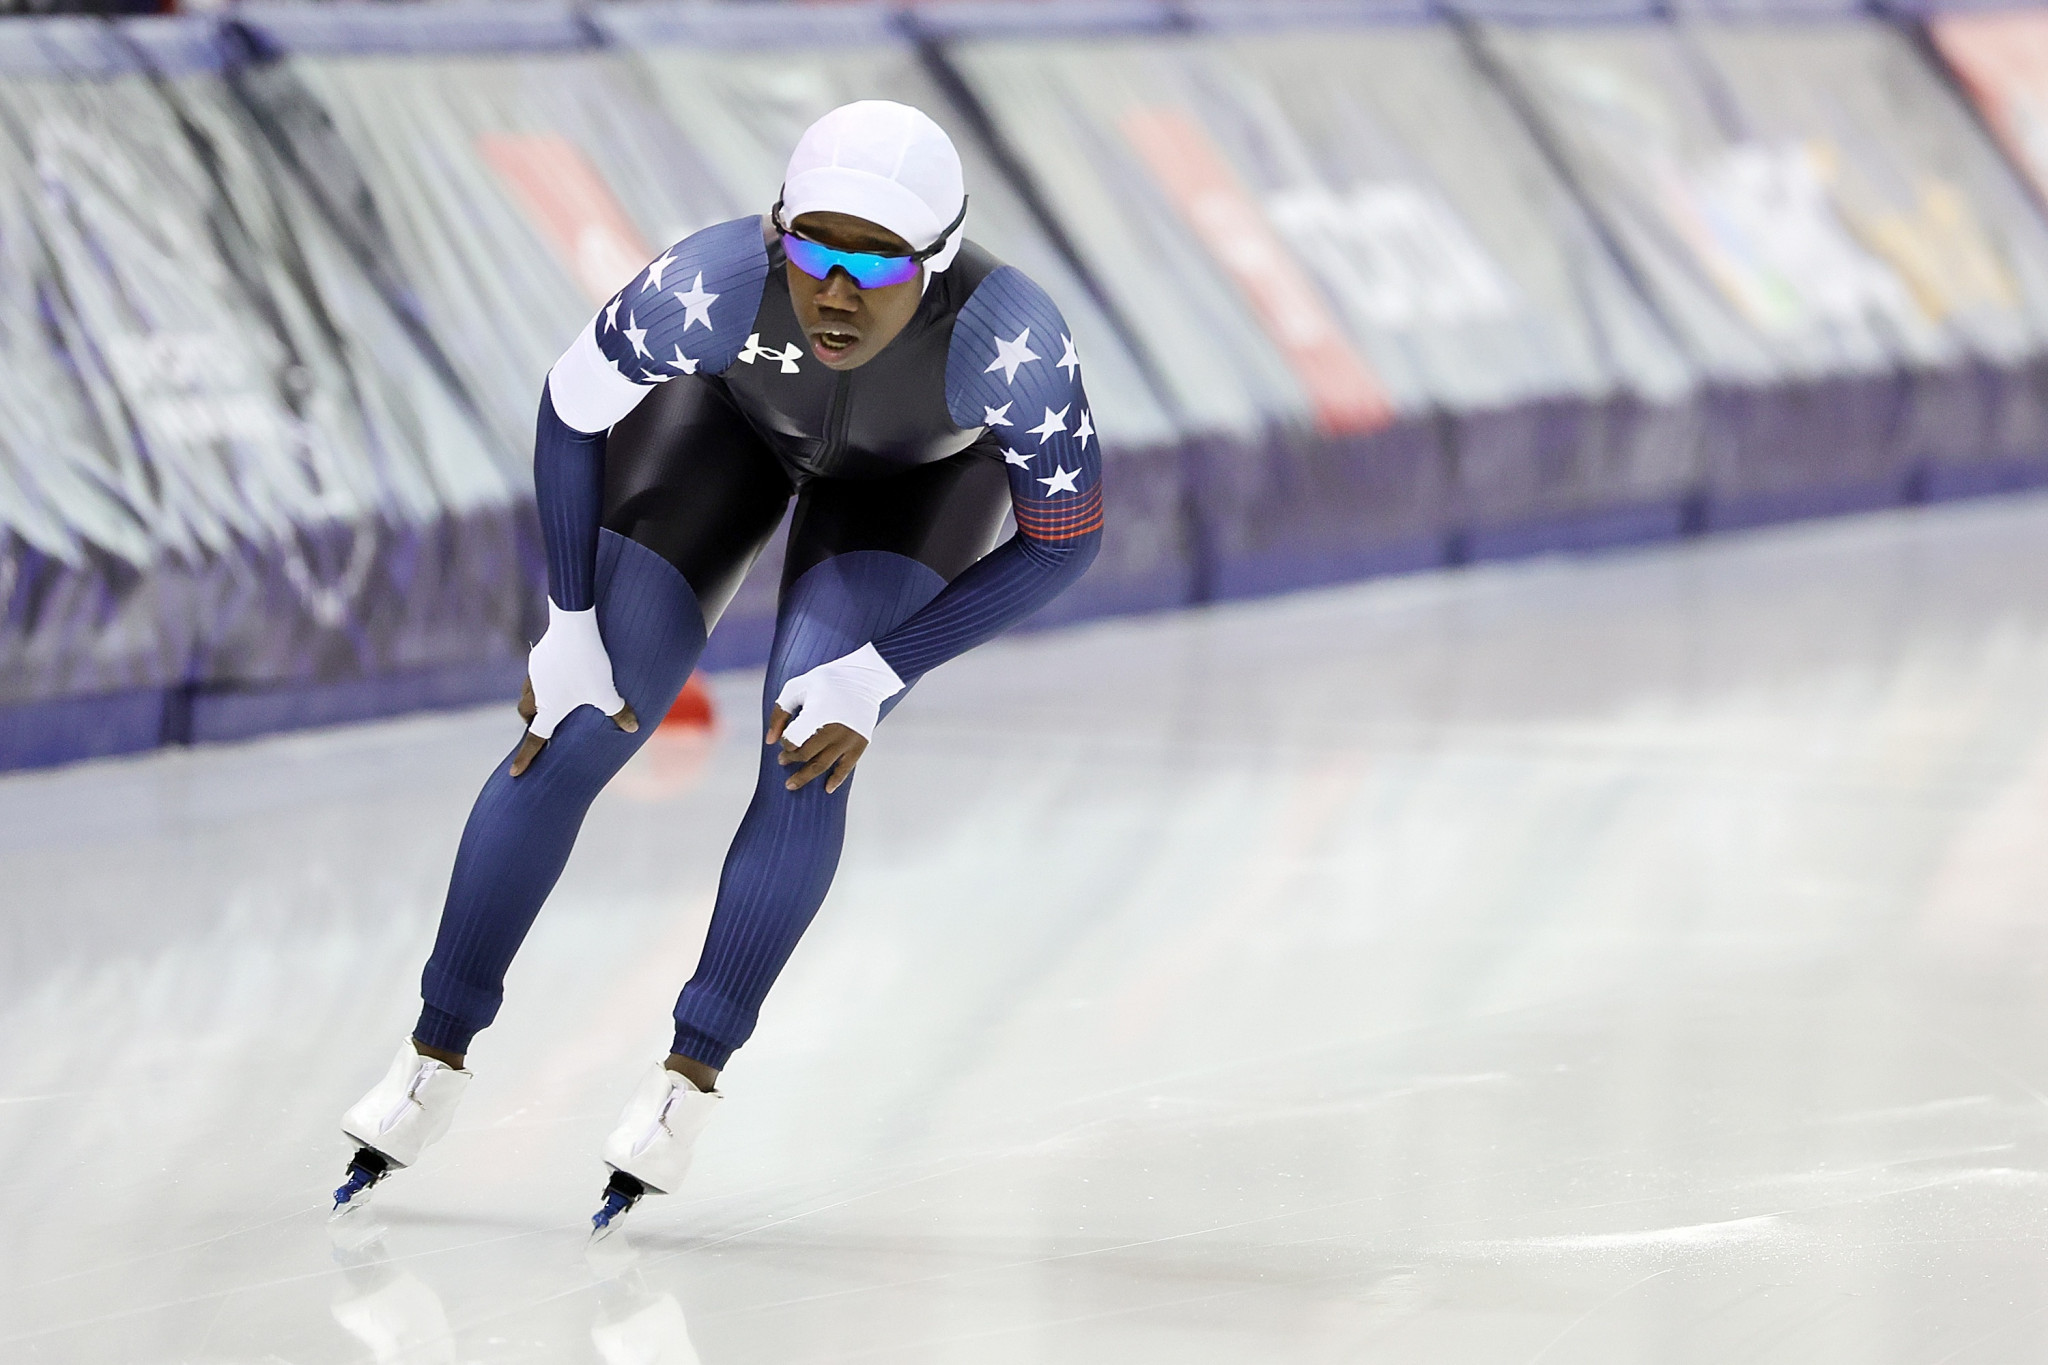 Erin Jackson's place at Beijing 2022 is in serious doubt after she finished third in the US Olympic trials ©Getty Images